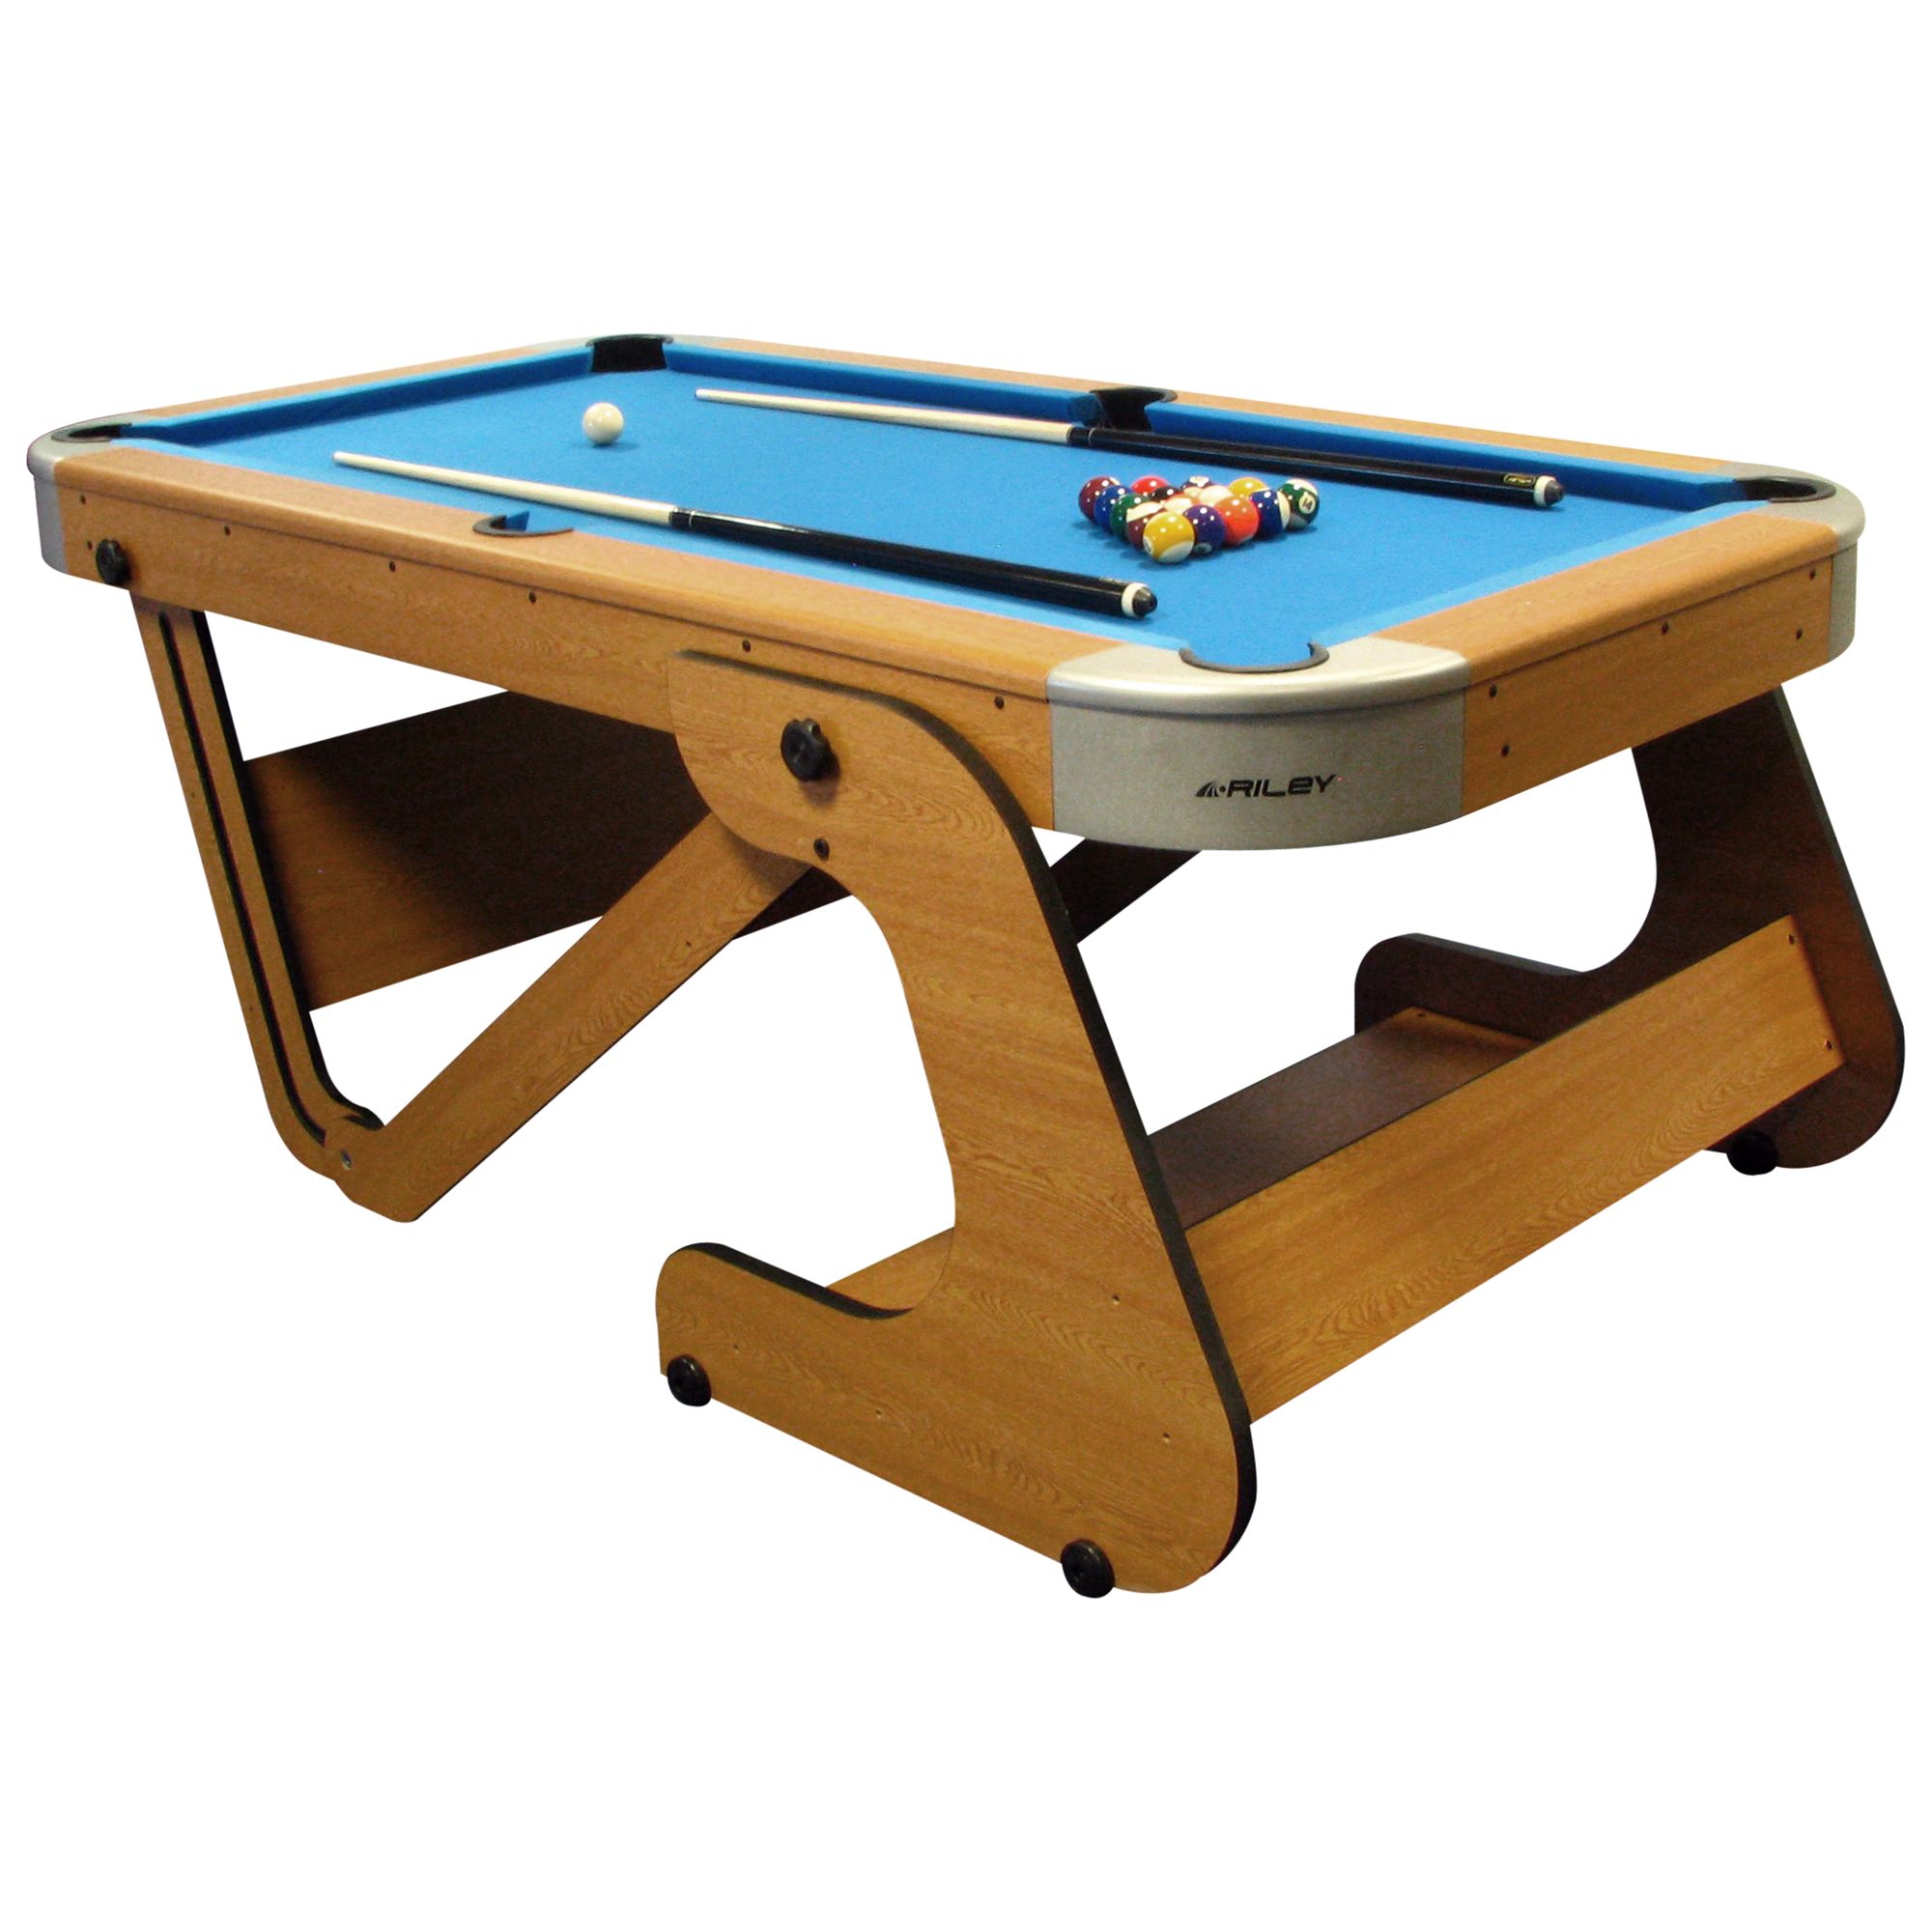 Buy BCE Riley 6 Foot 6 Inch Folding Pool Table Online at johnlewis.com